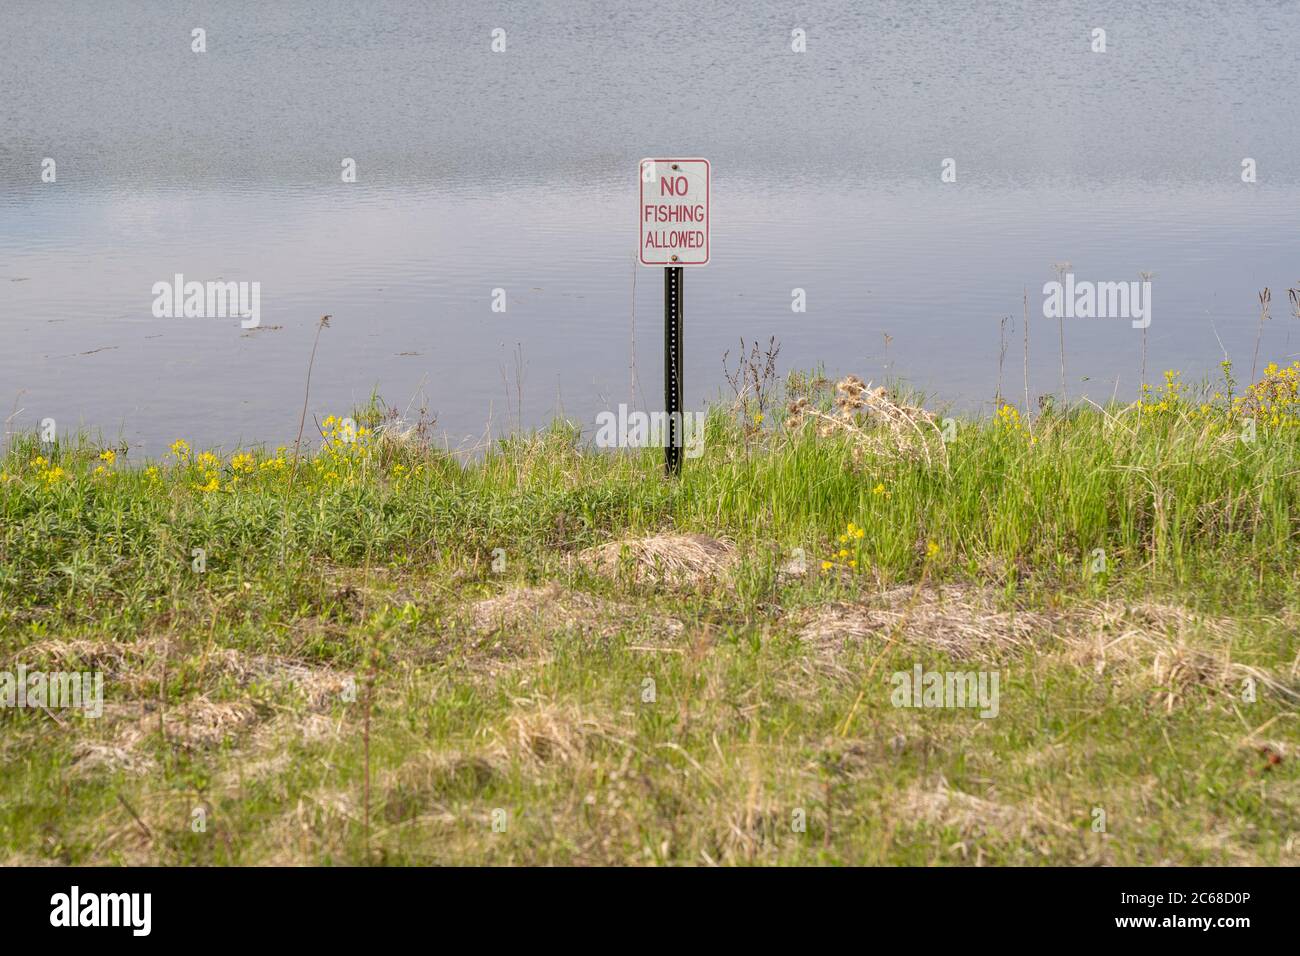 No fishing allowed sign near a lake. Taken in the Arbor Lakes area of Maple Grove, Minnesota Stock Photo